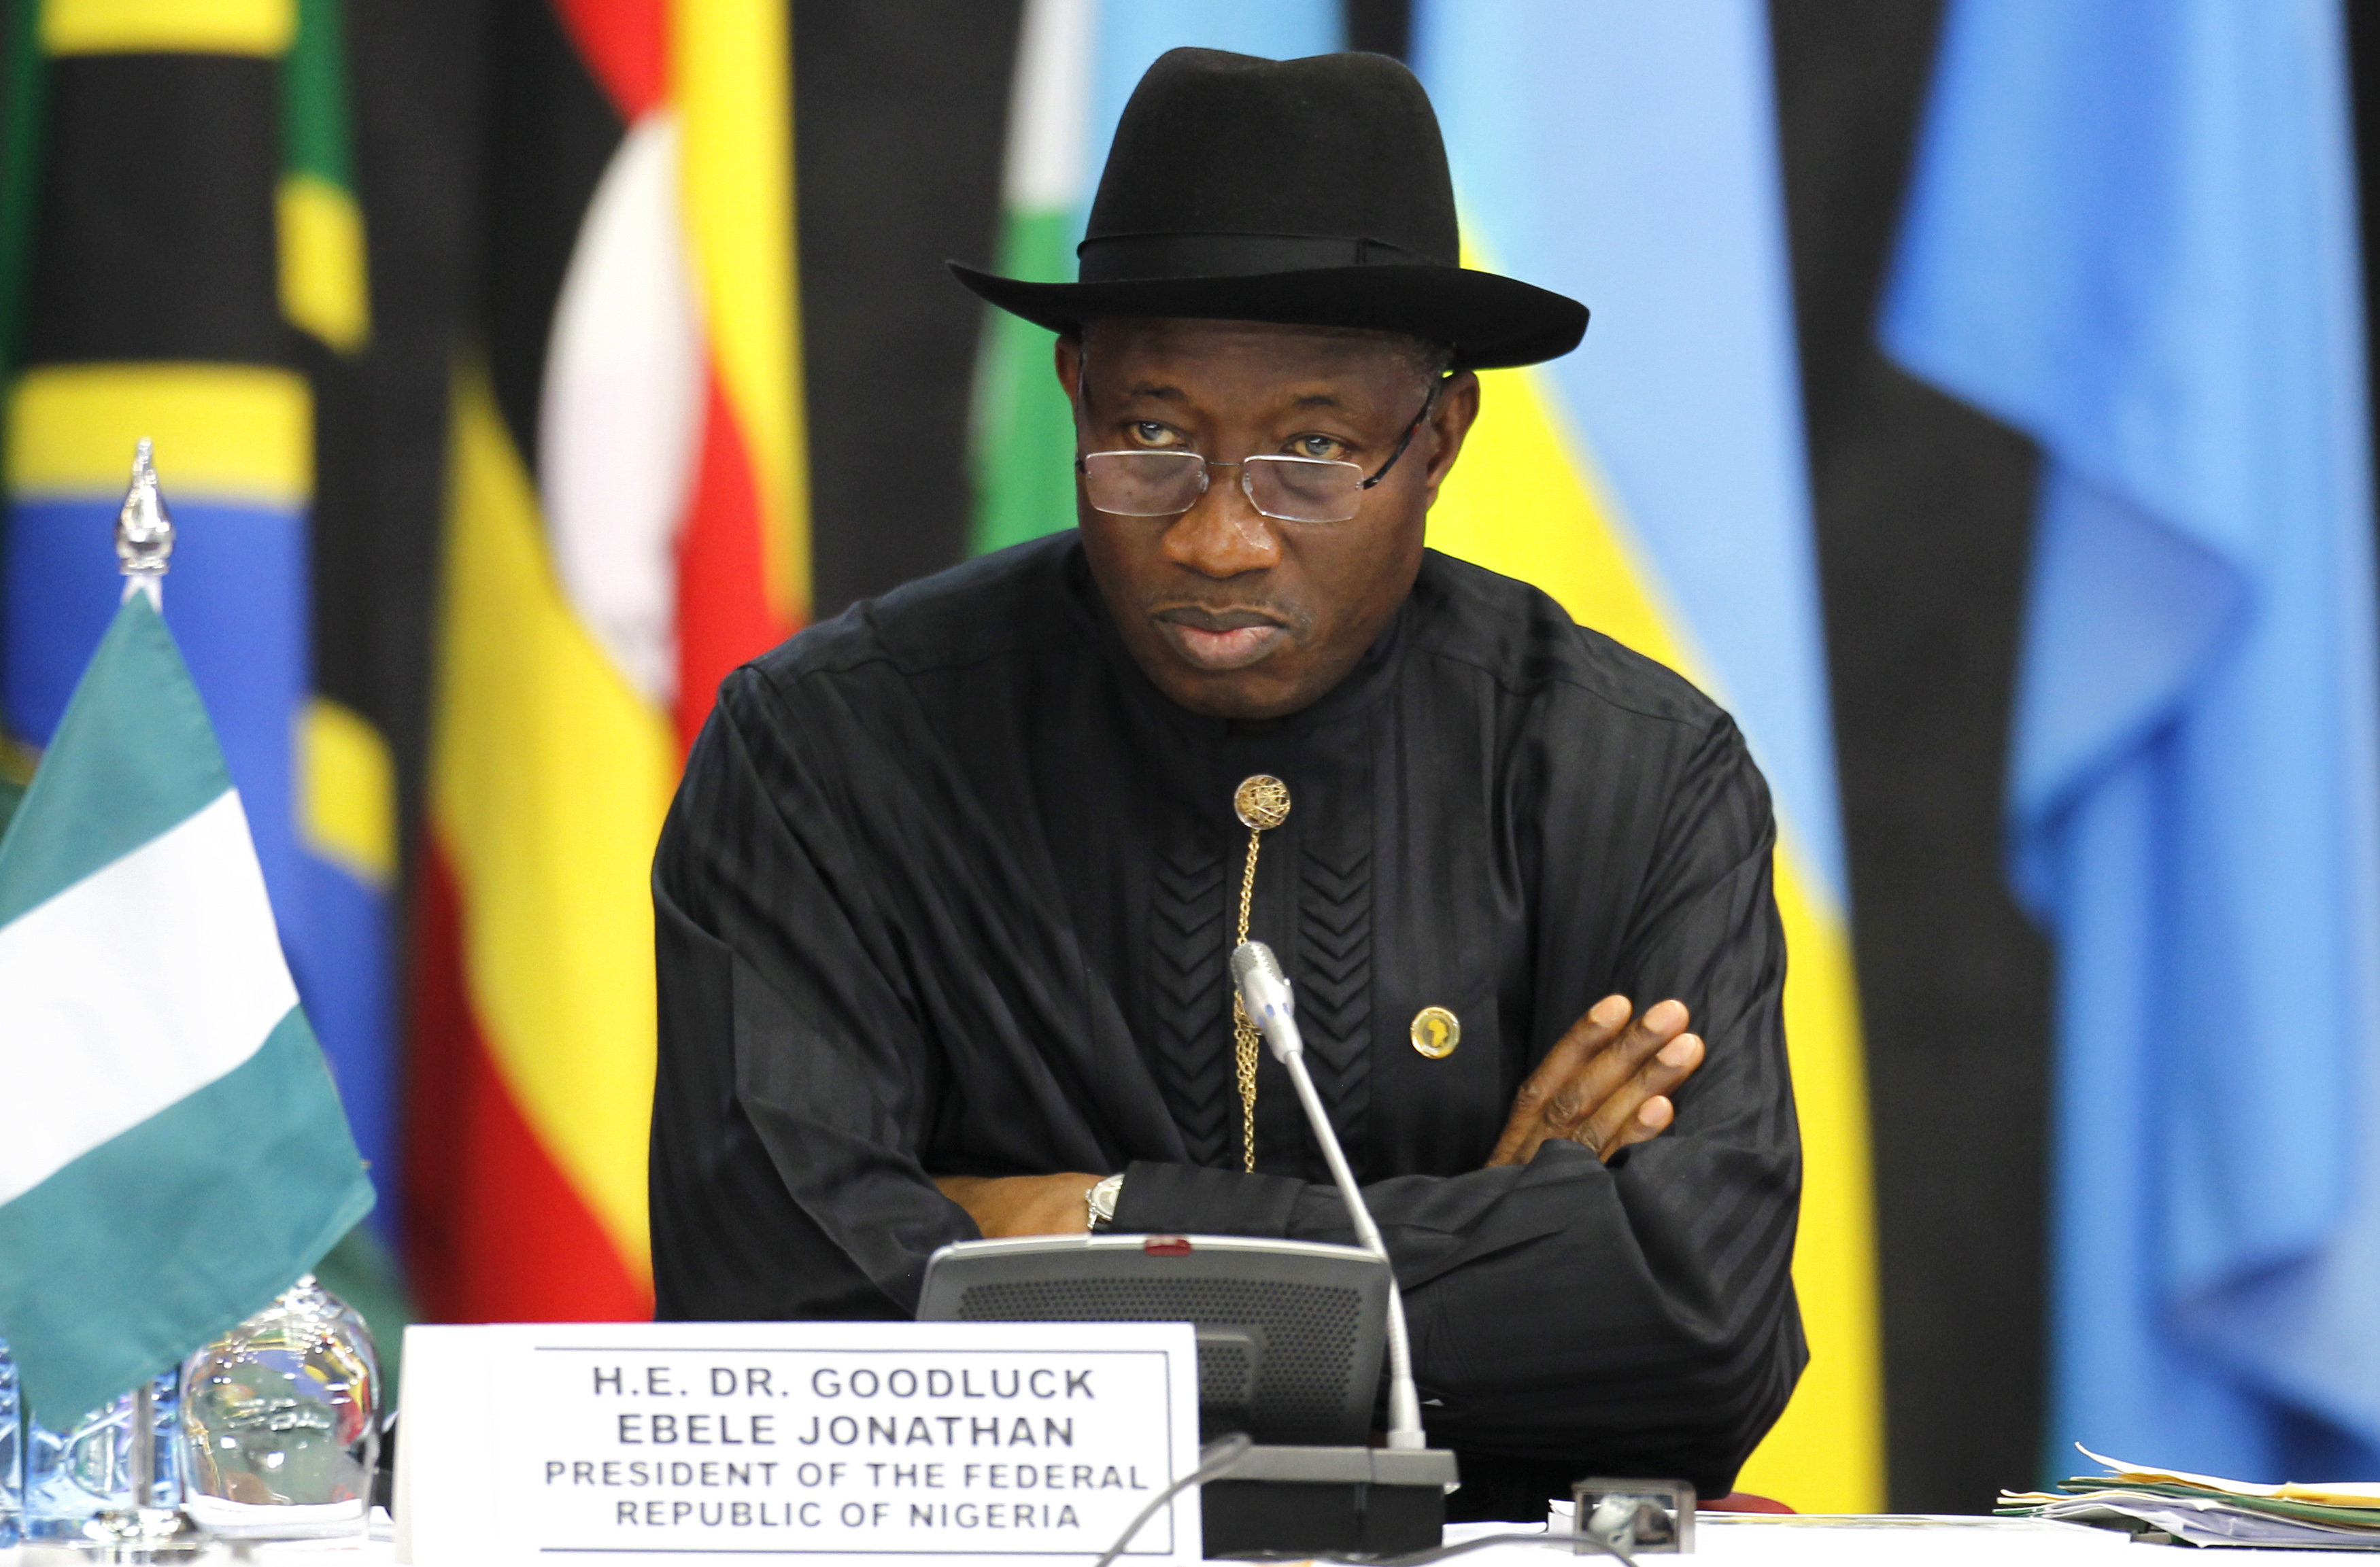 Nigeria's President Jonathan attends the Africa Union Peace and Security Council Summit on Terrorism at the KICC in Nairobi